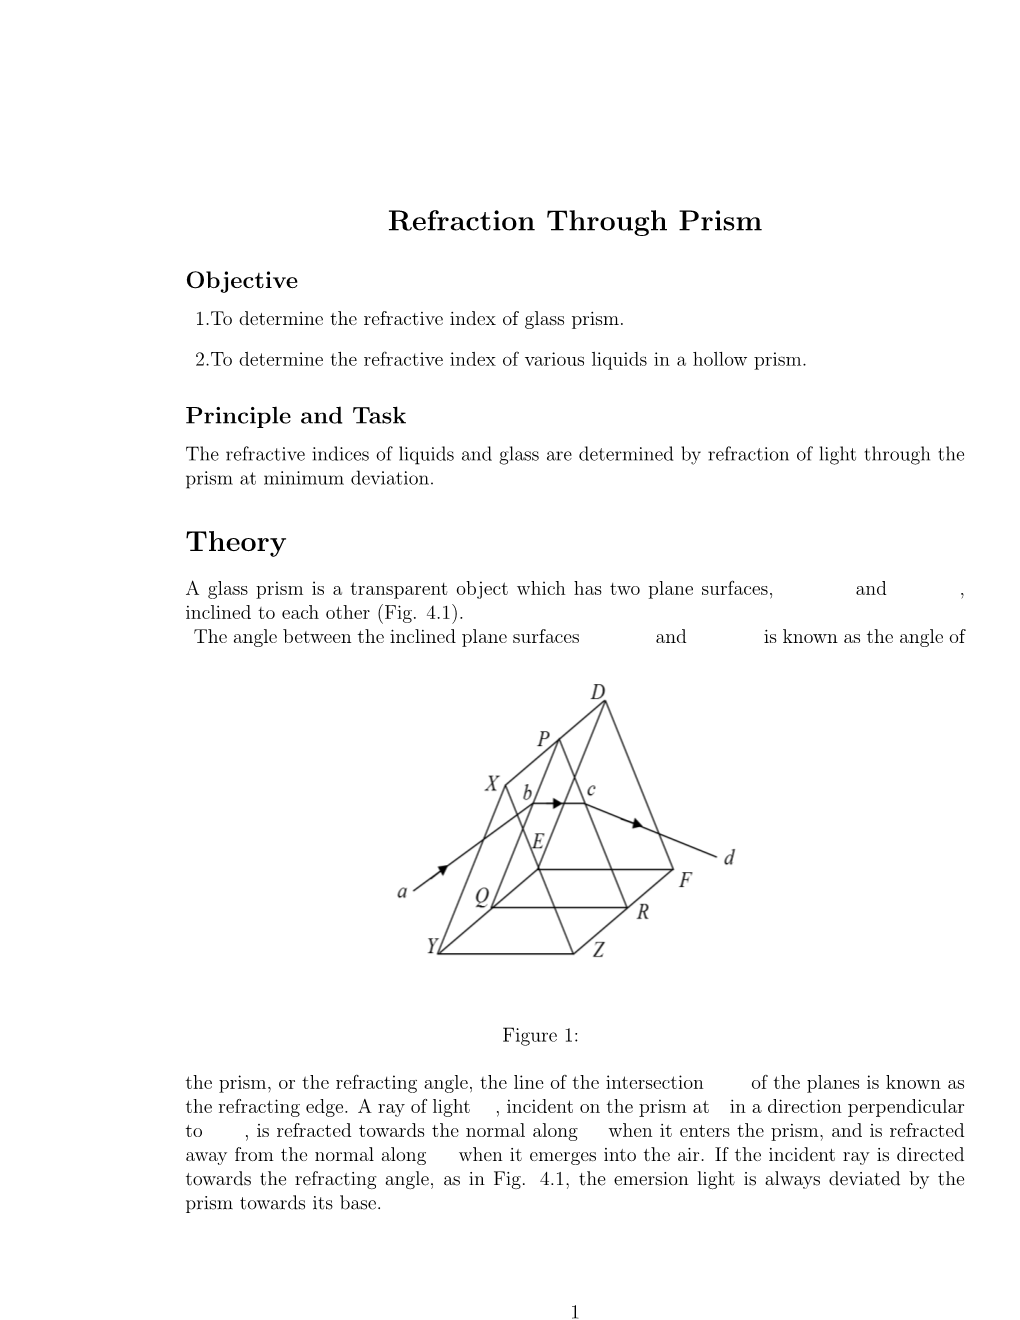 Refraction Through Prism Theory